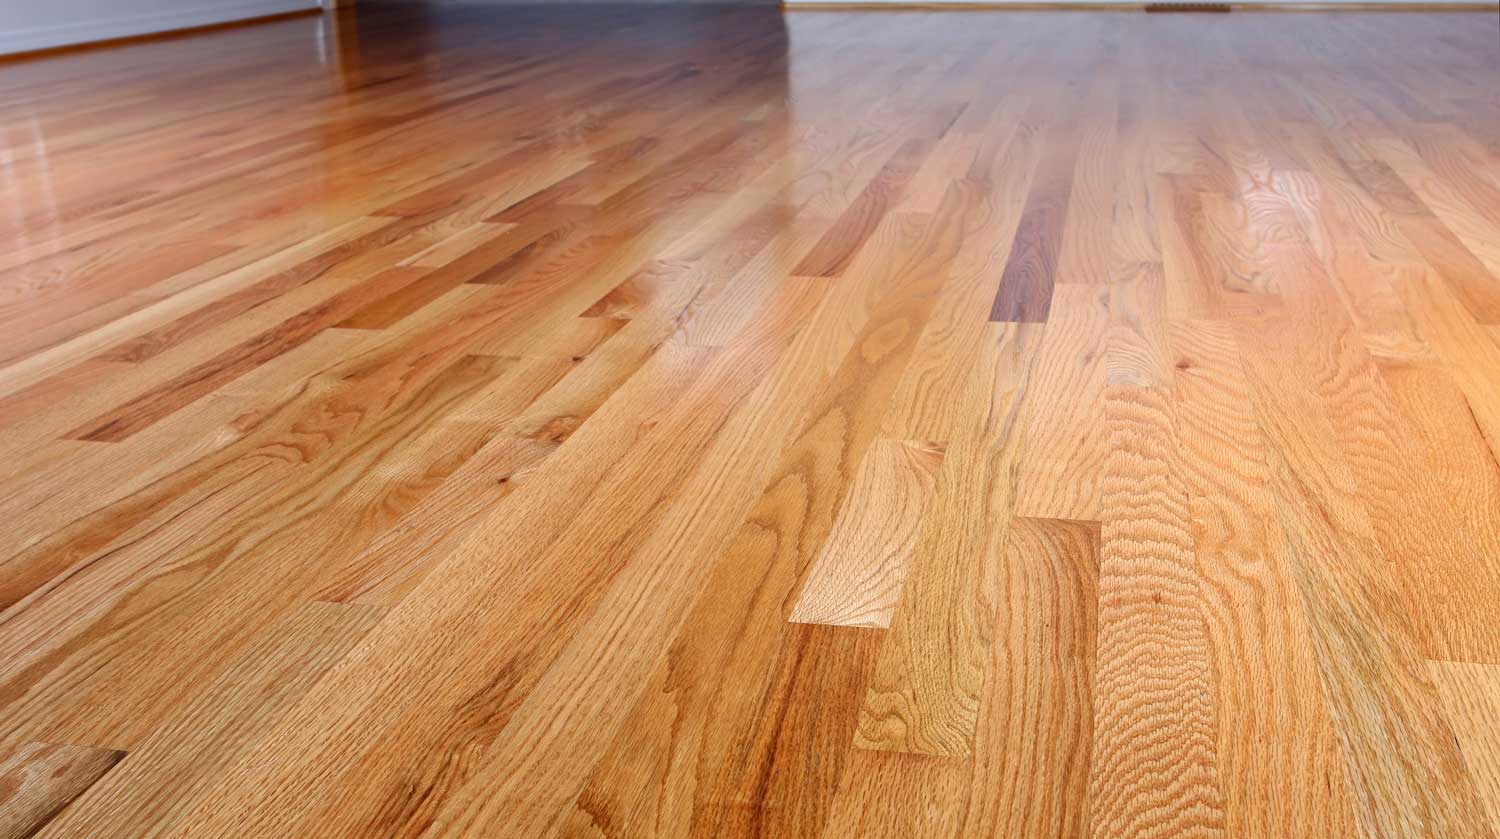 Cost To Refinish A Hardwood Floor, How Much Does It Cost To Install 300 Square Feet Of Hardwood Floors